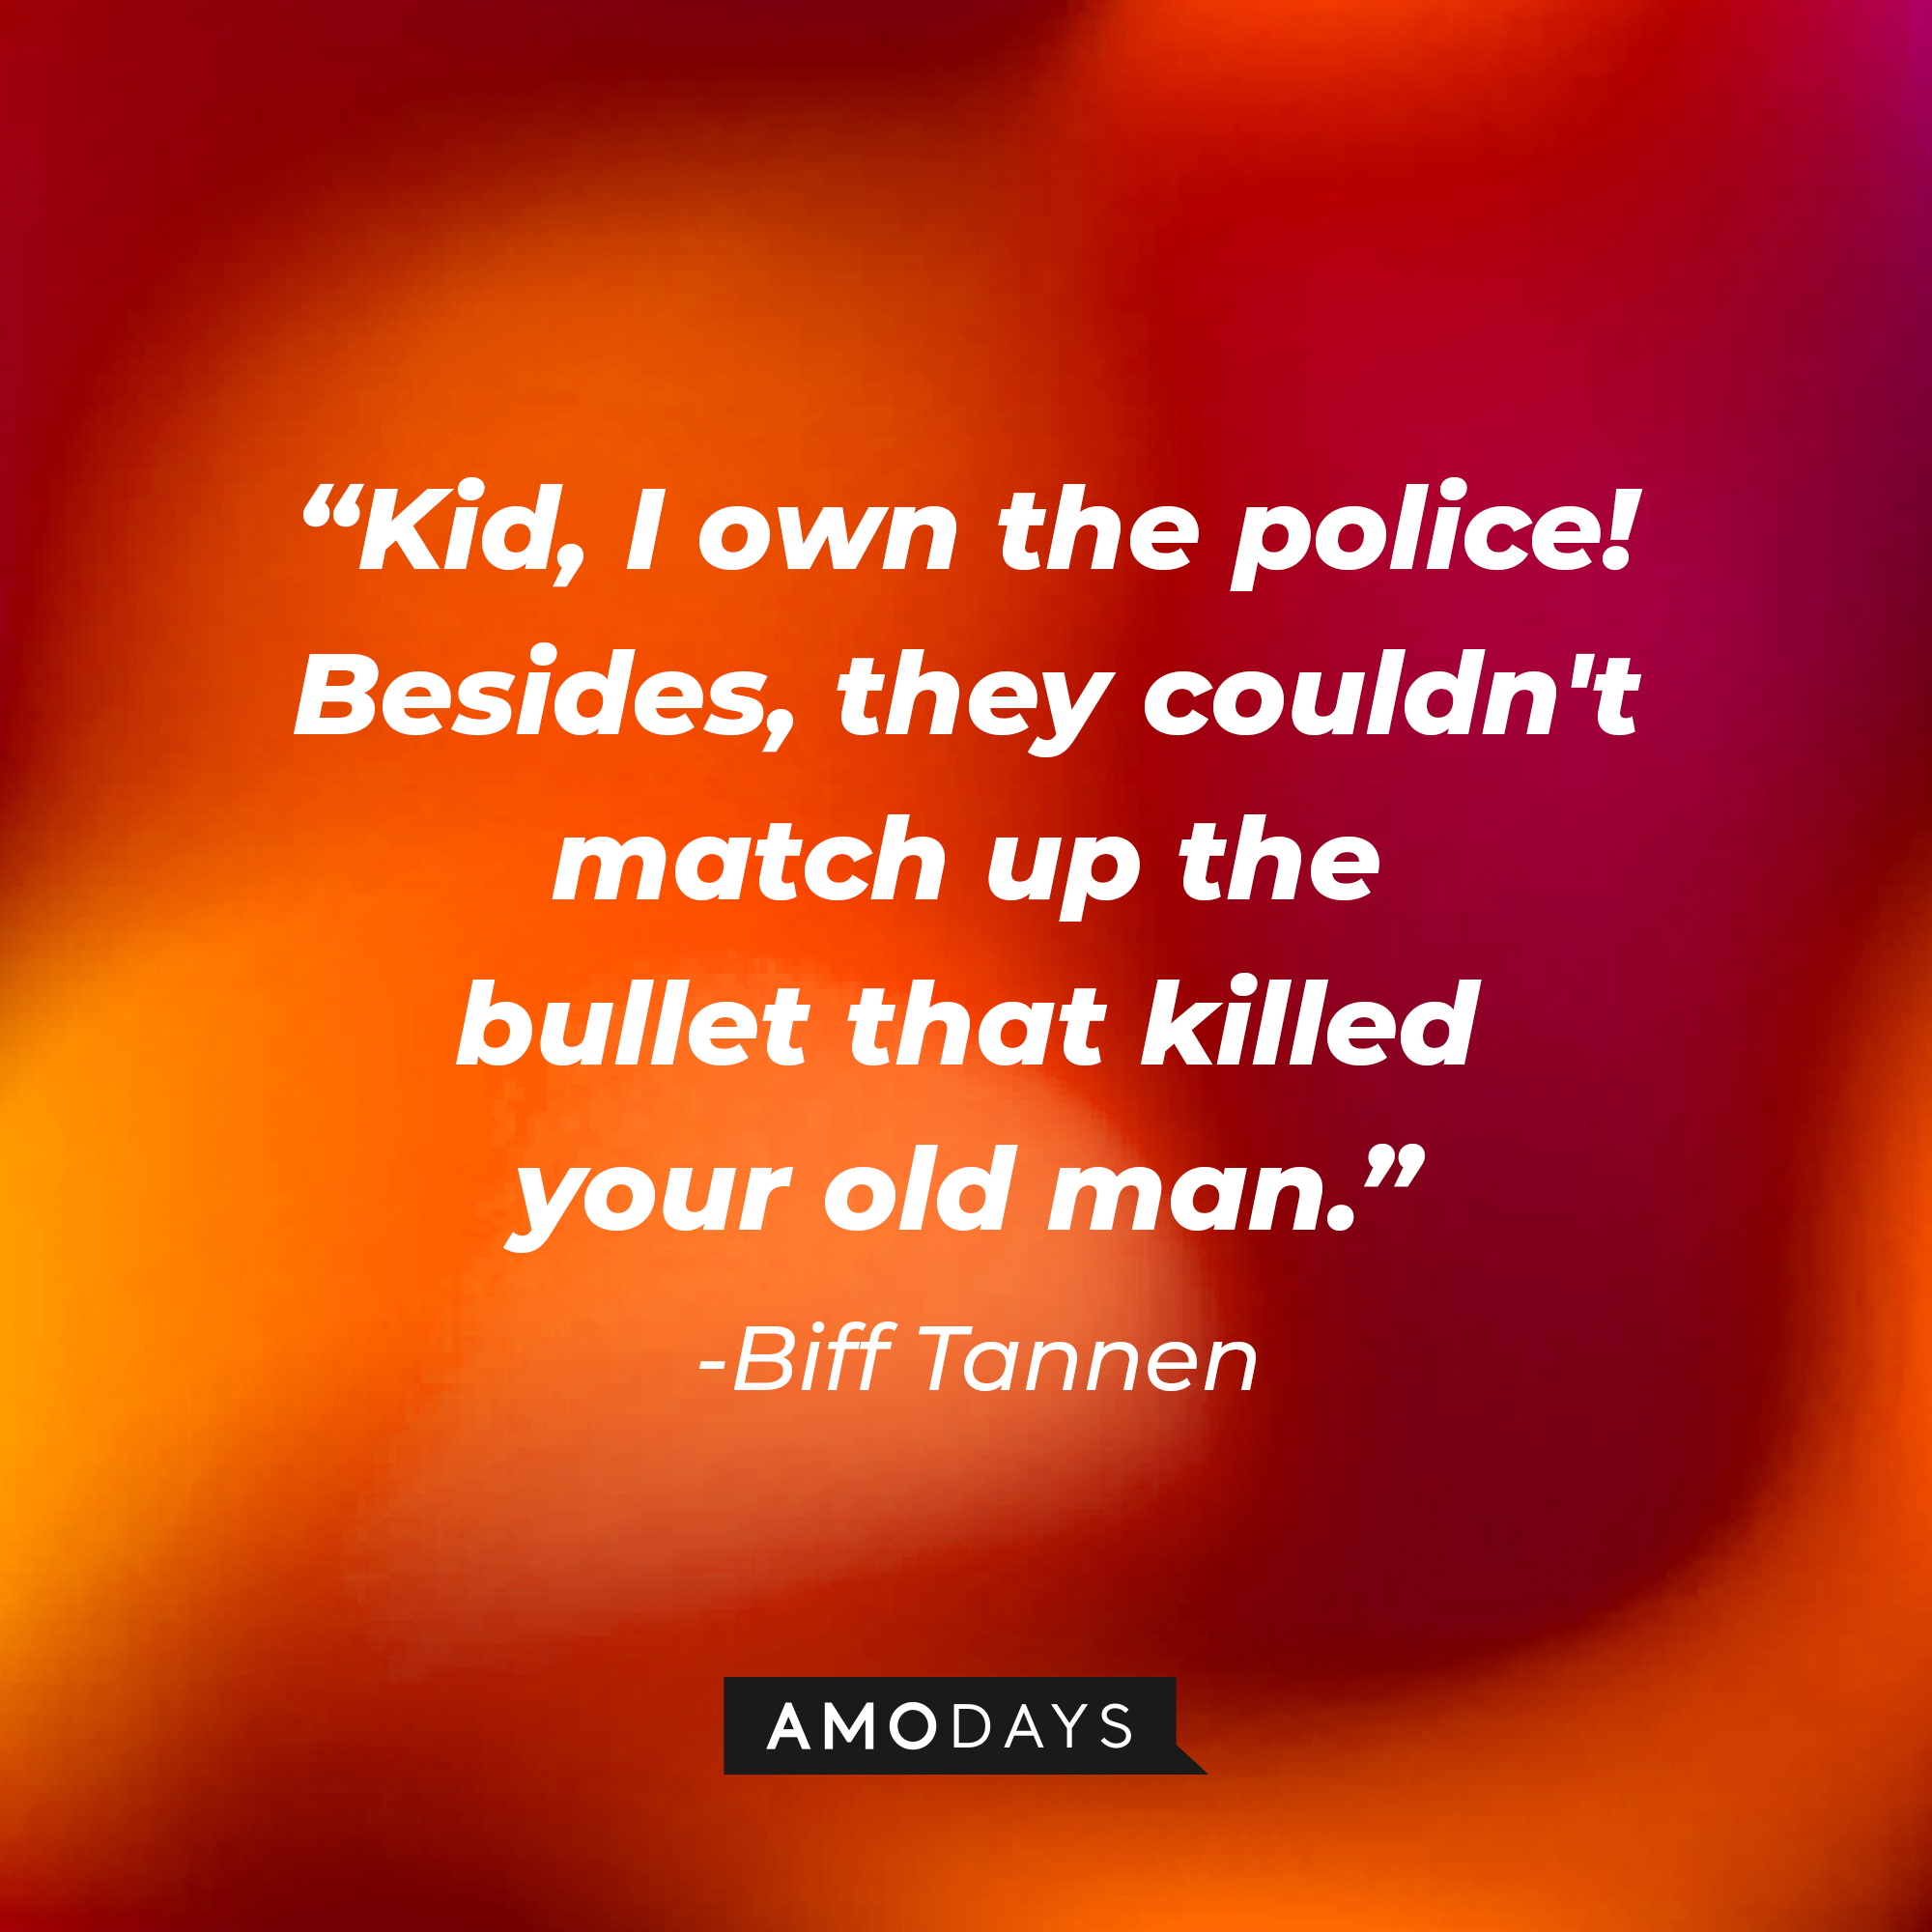 Biff Tannen’s quote: “Kid, I own the police! Besides, they couldn't match up the bullet that killed your old man.” | Source: AmoDays